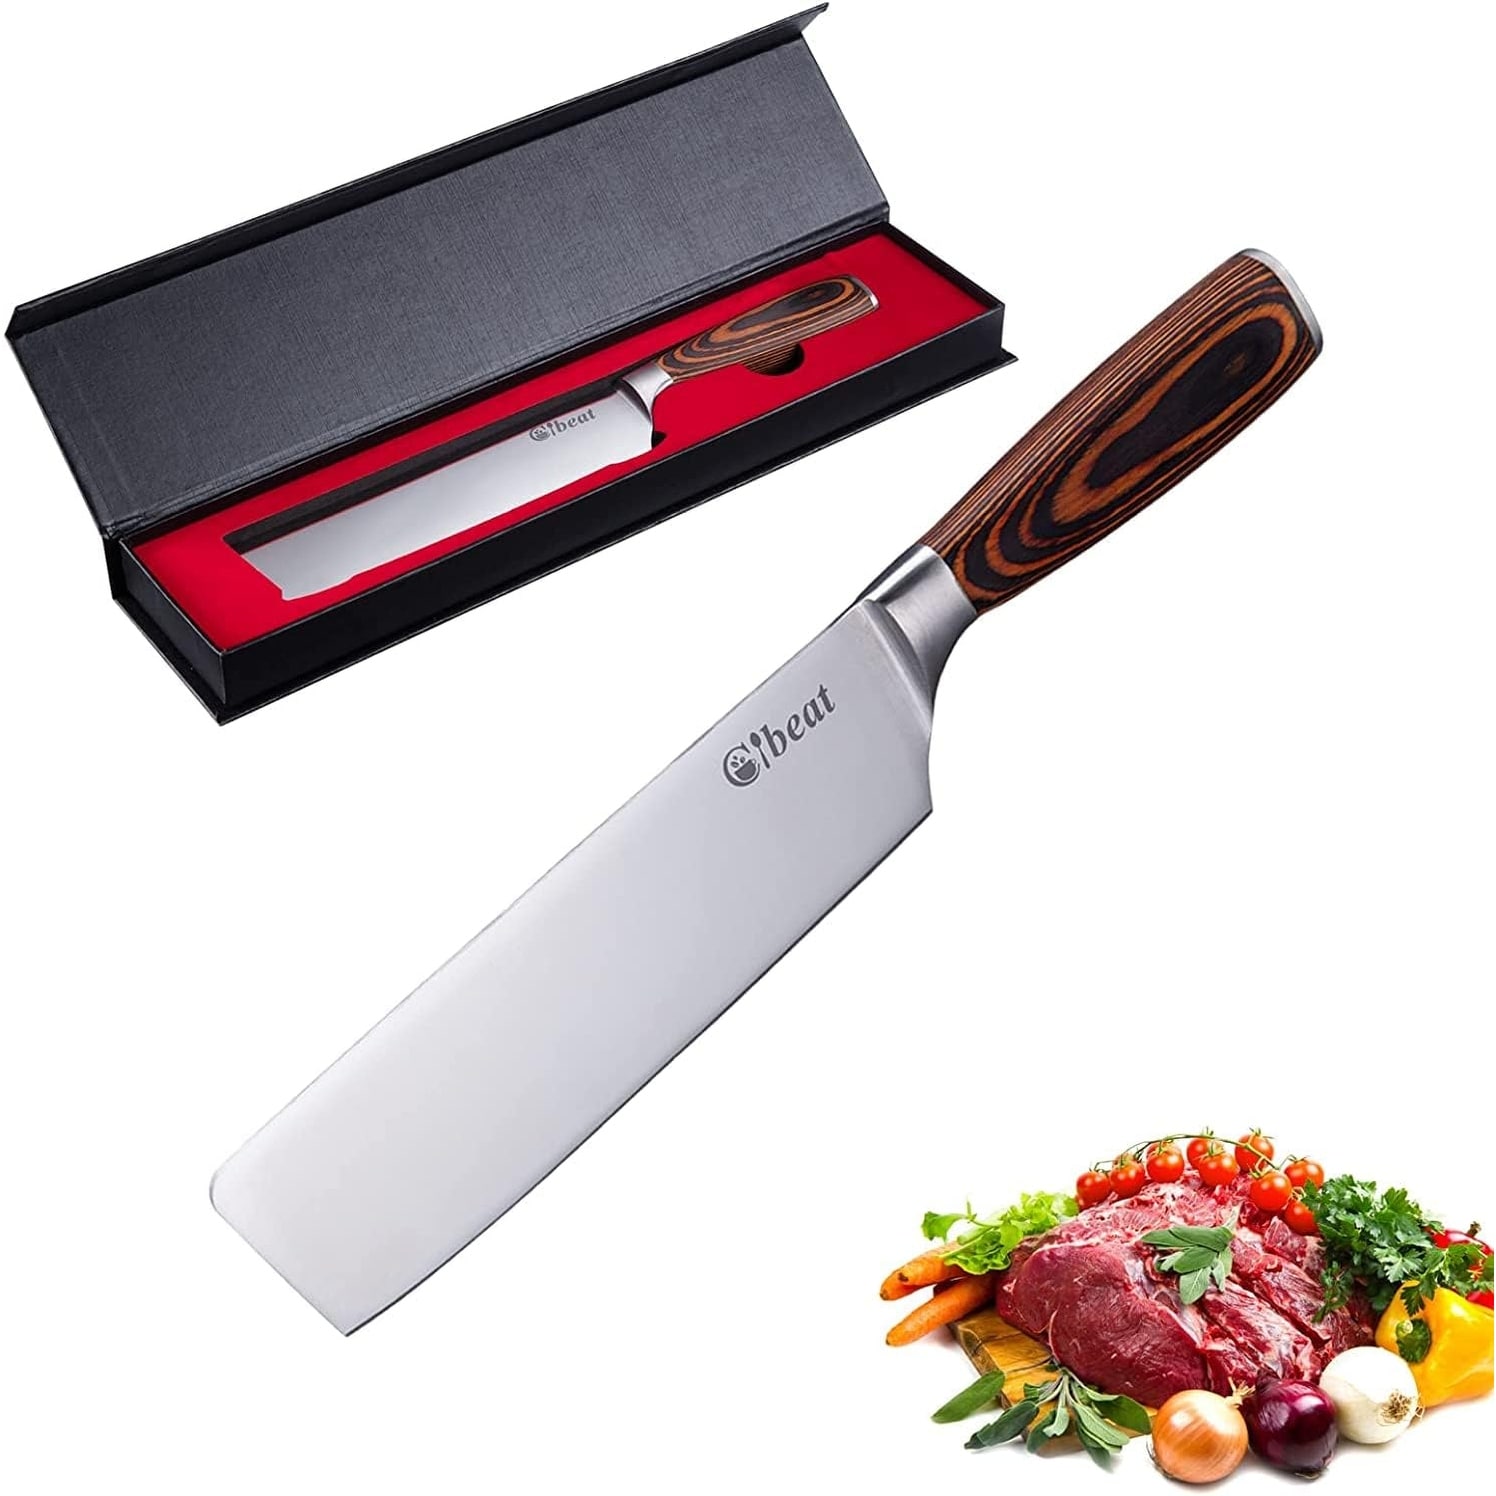 https://ak1.ostkcdn.com/images/products/is/images/direct/8225dacb6464d05ea548806e781499d42a7021b0/GlowSol-Japanese-Chef-Knife%2C-7-Inch-Meat-Vegetable-Cleaver-Knife.jpg